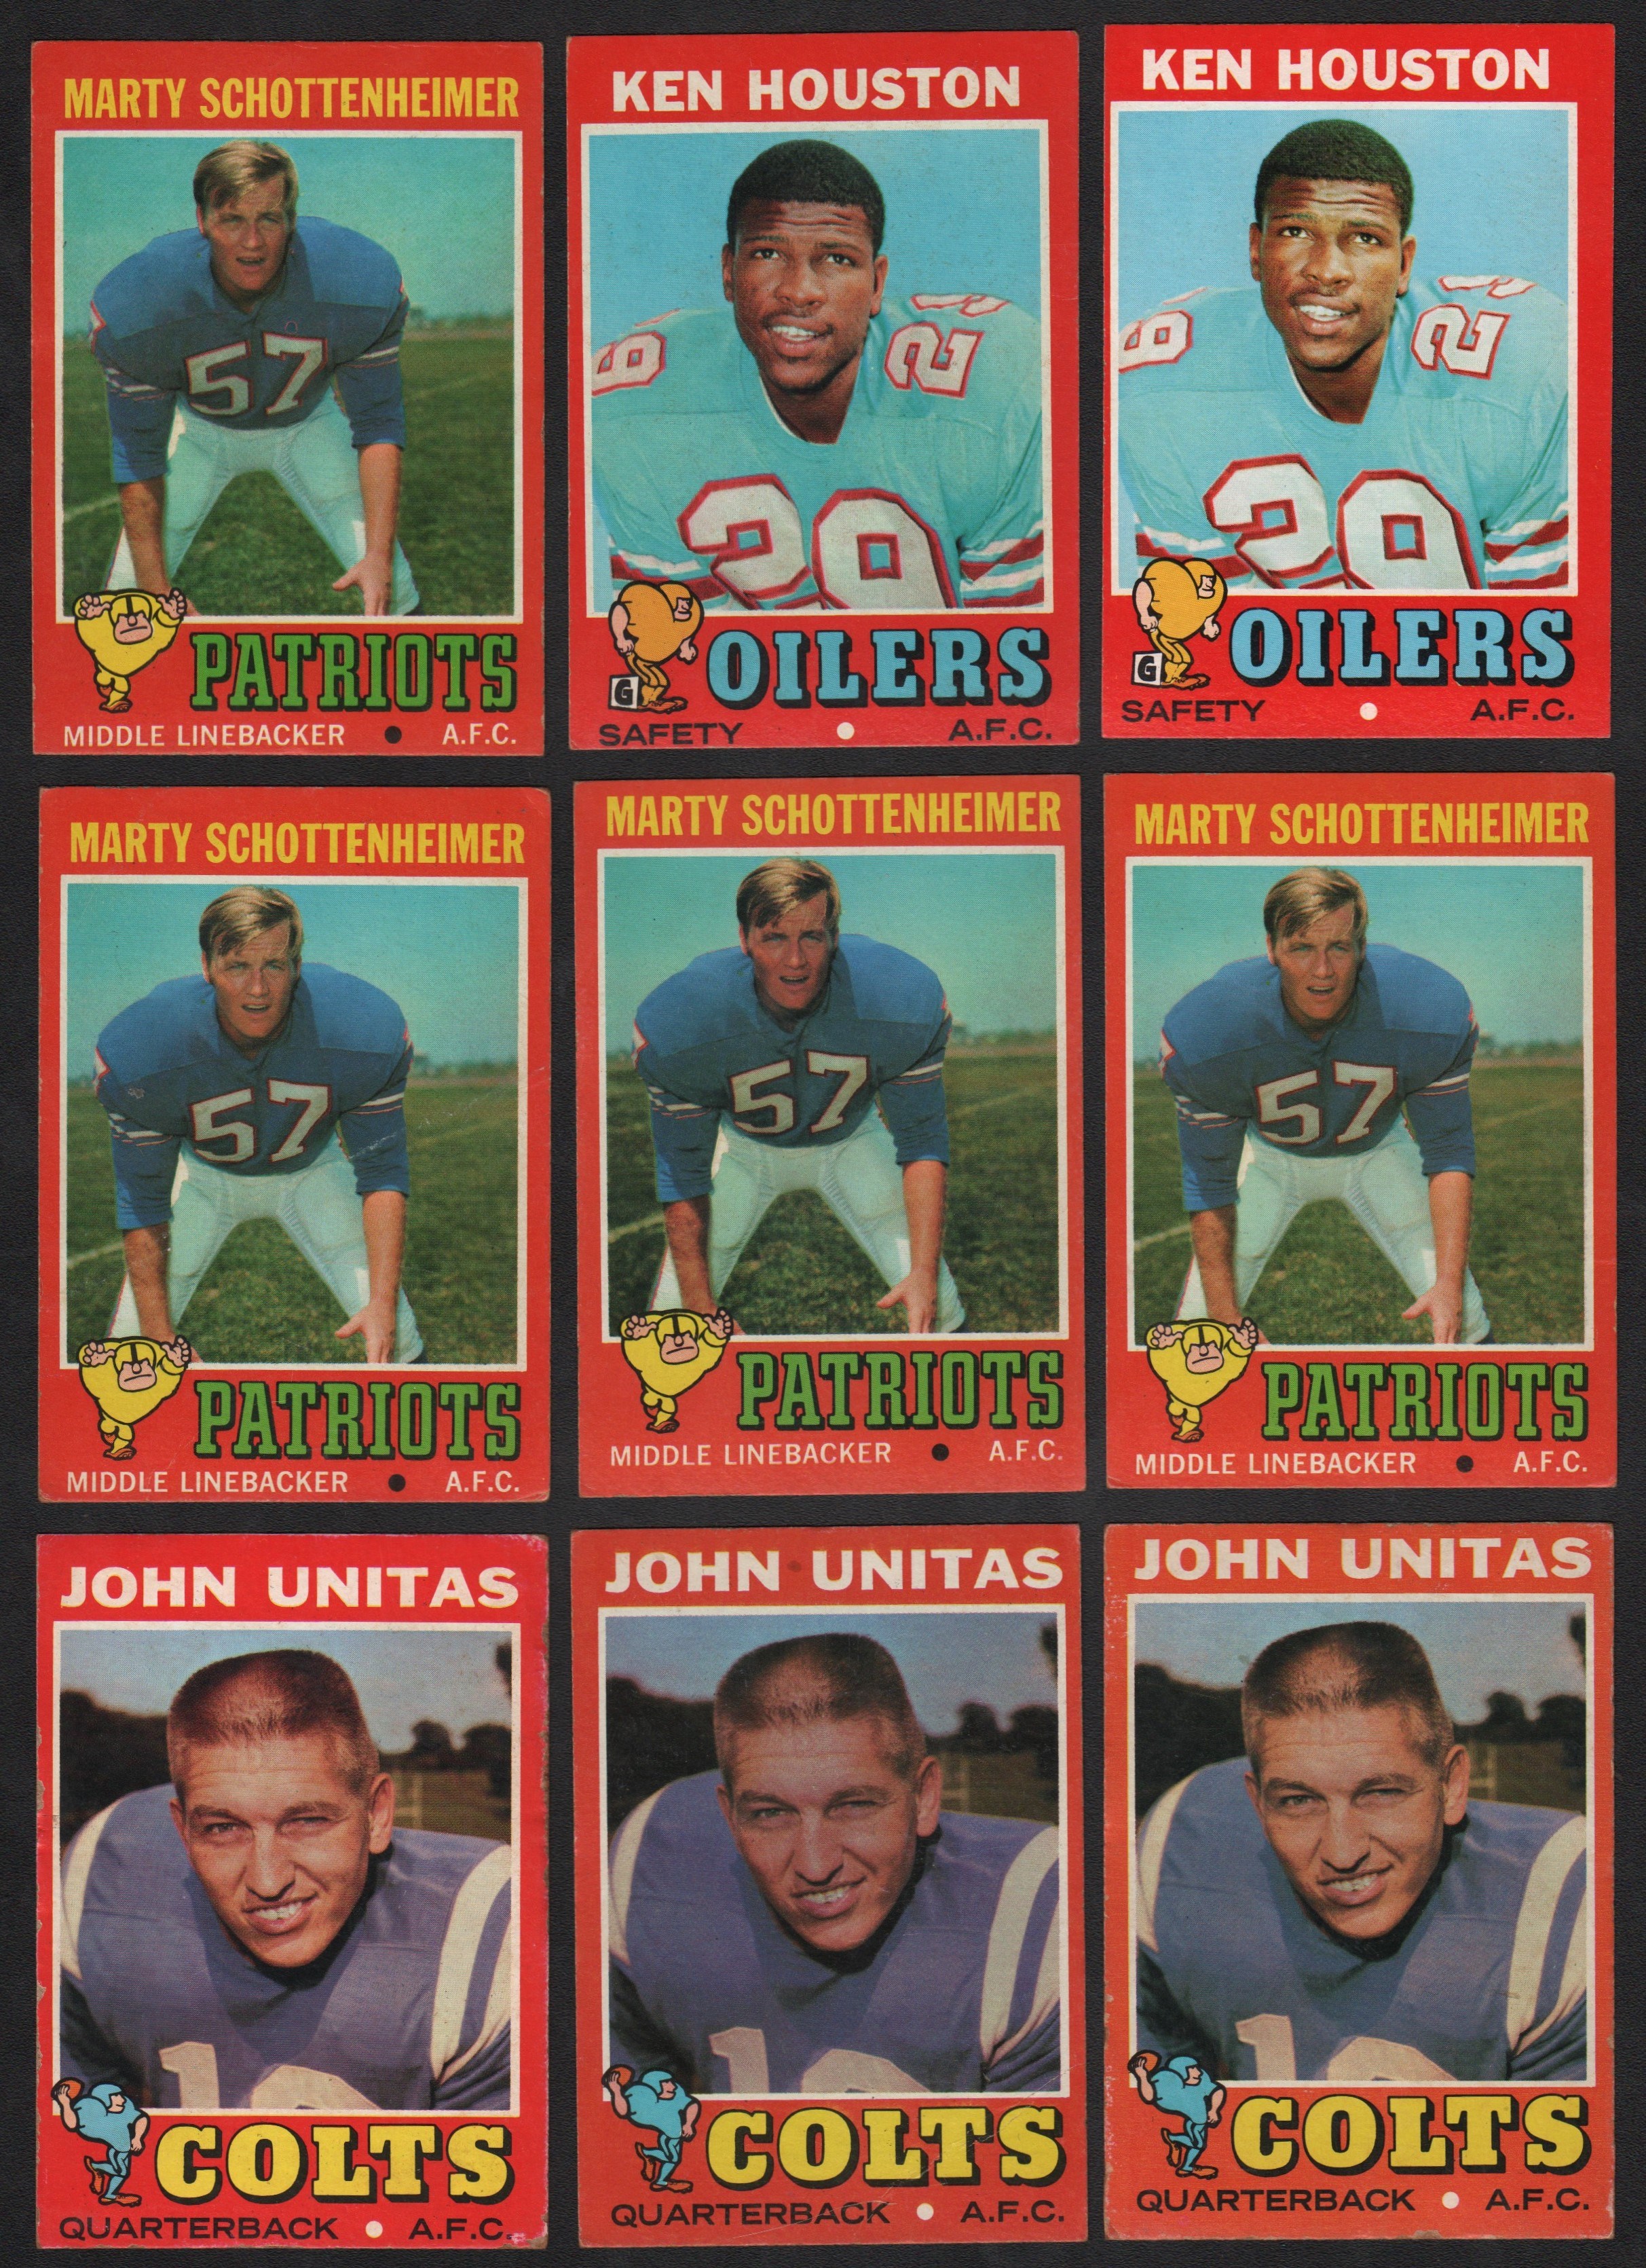 - 1970-73 Topps Football Card Collection (4,000+)